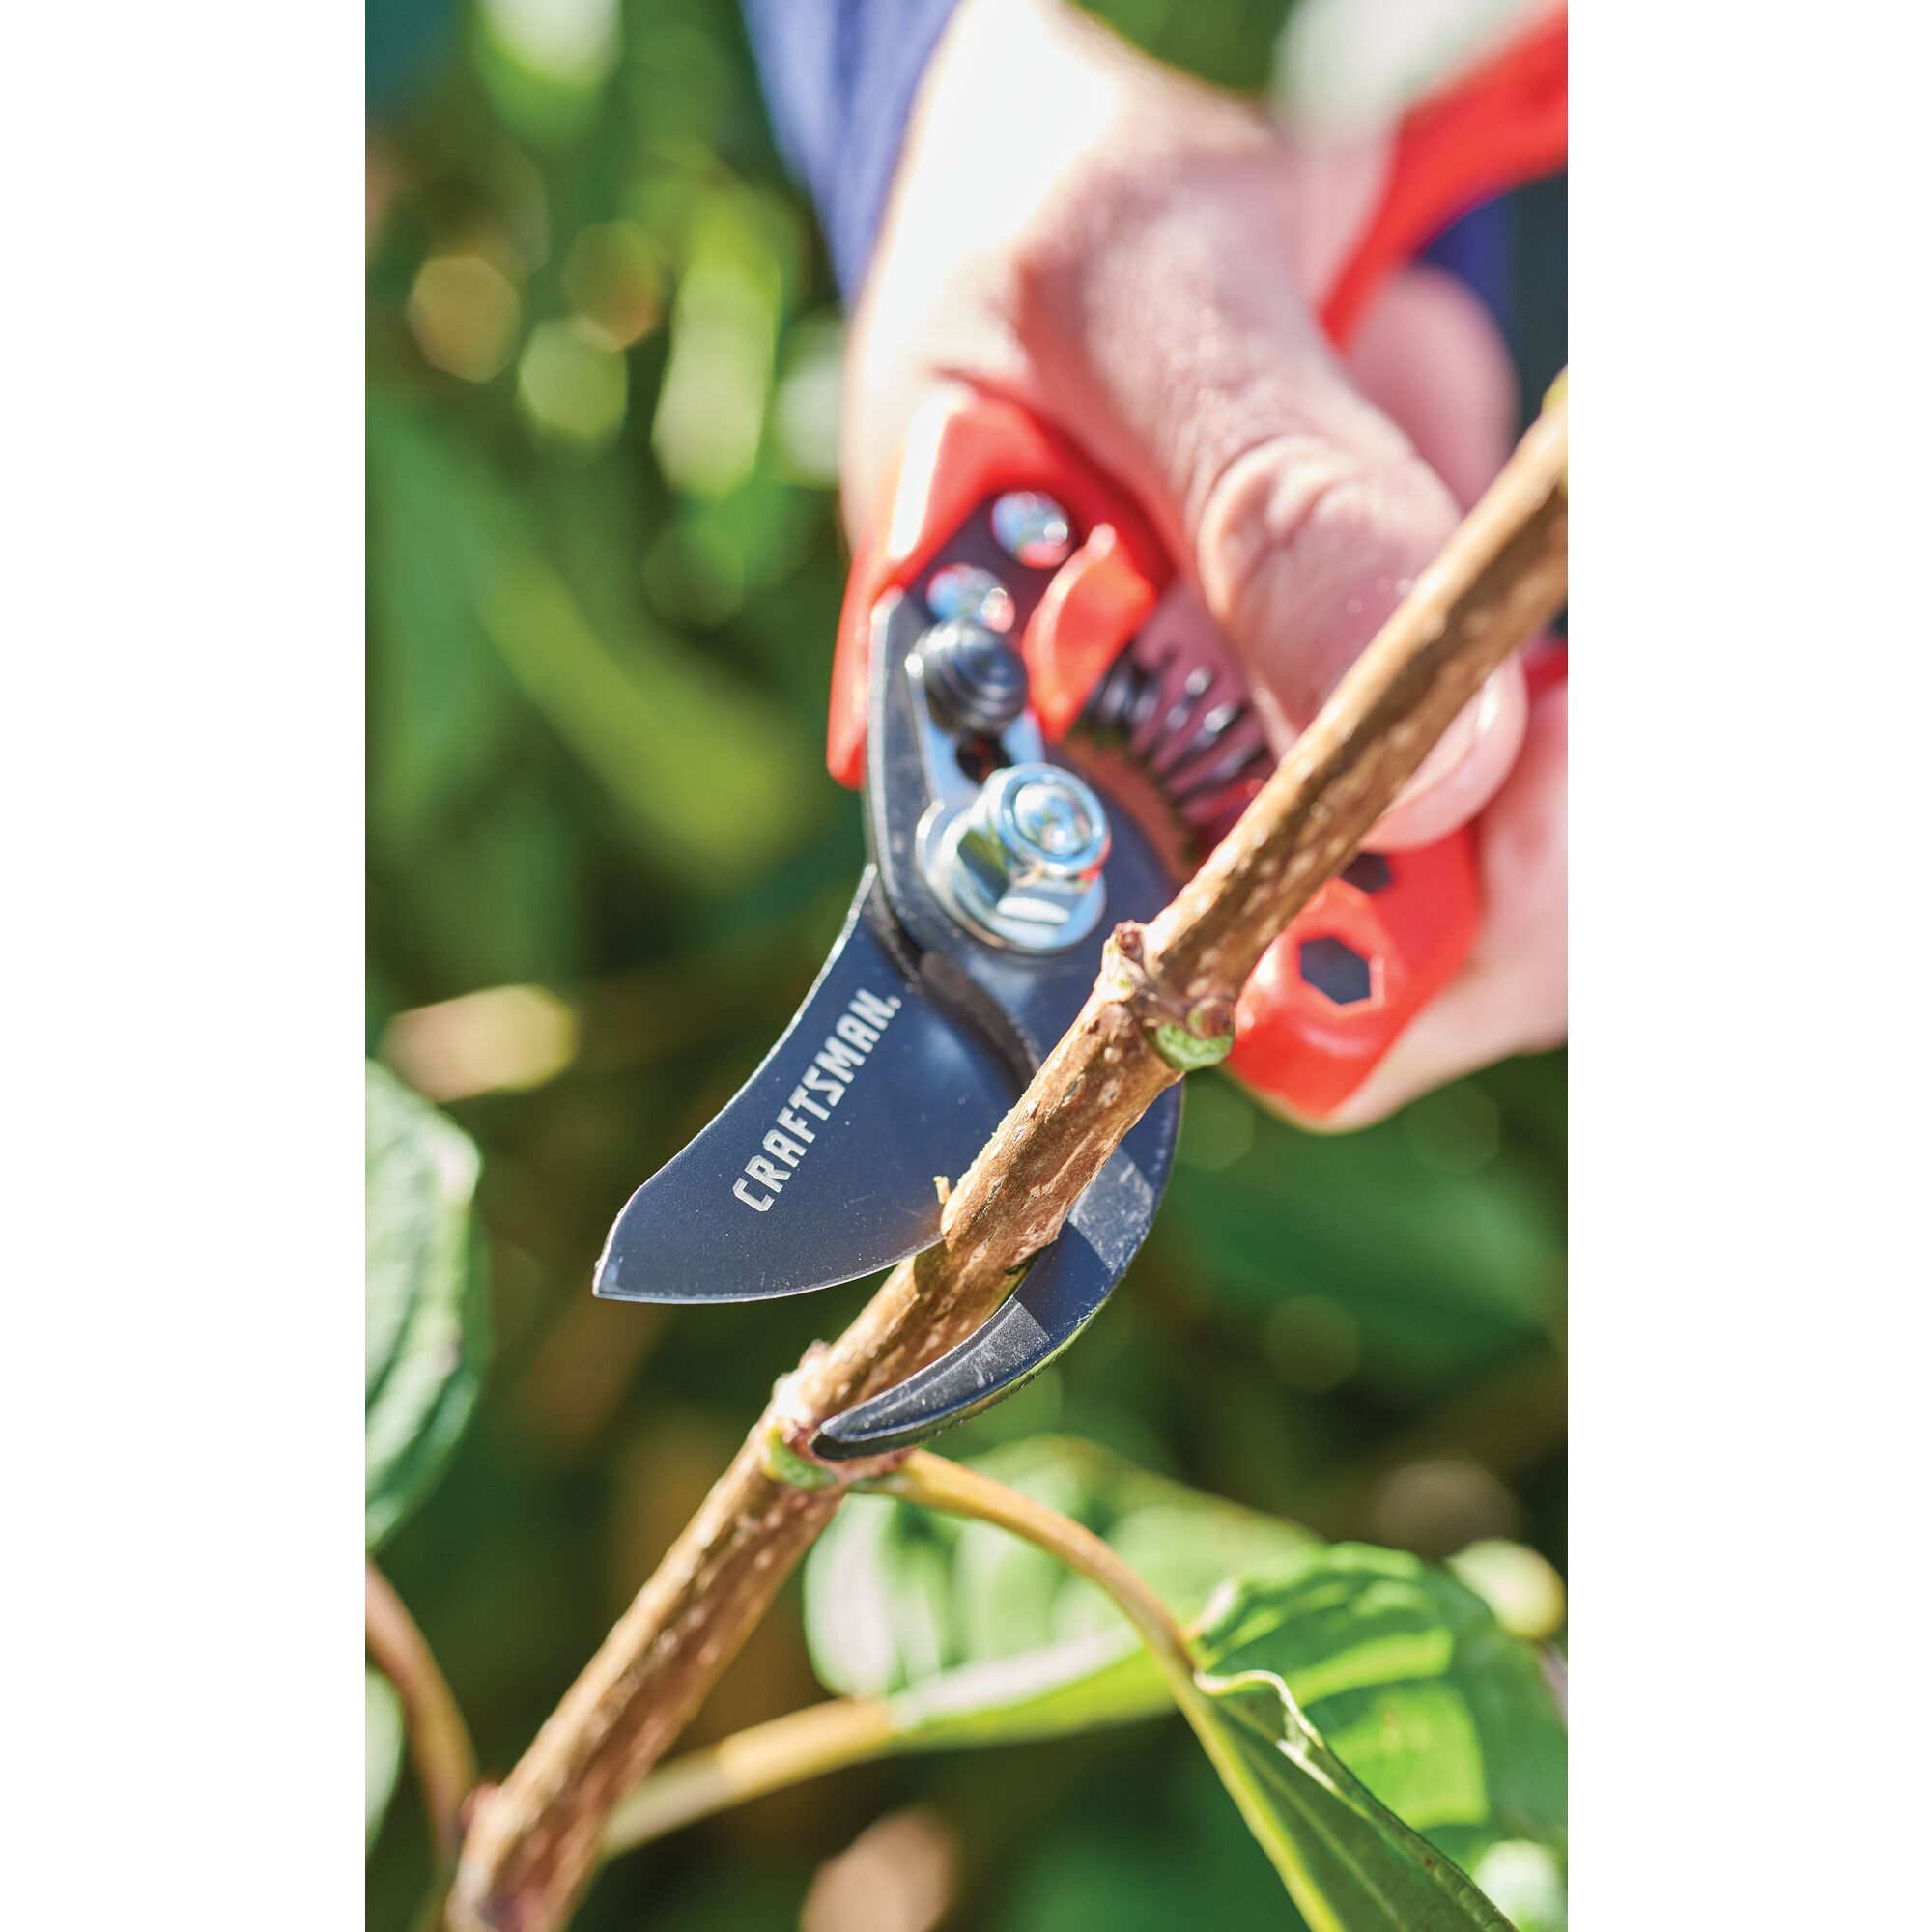 Bypass pruner being used by a person to cut a branch.